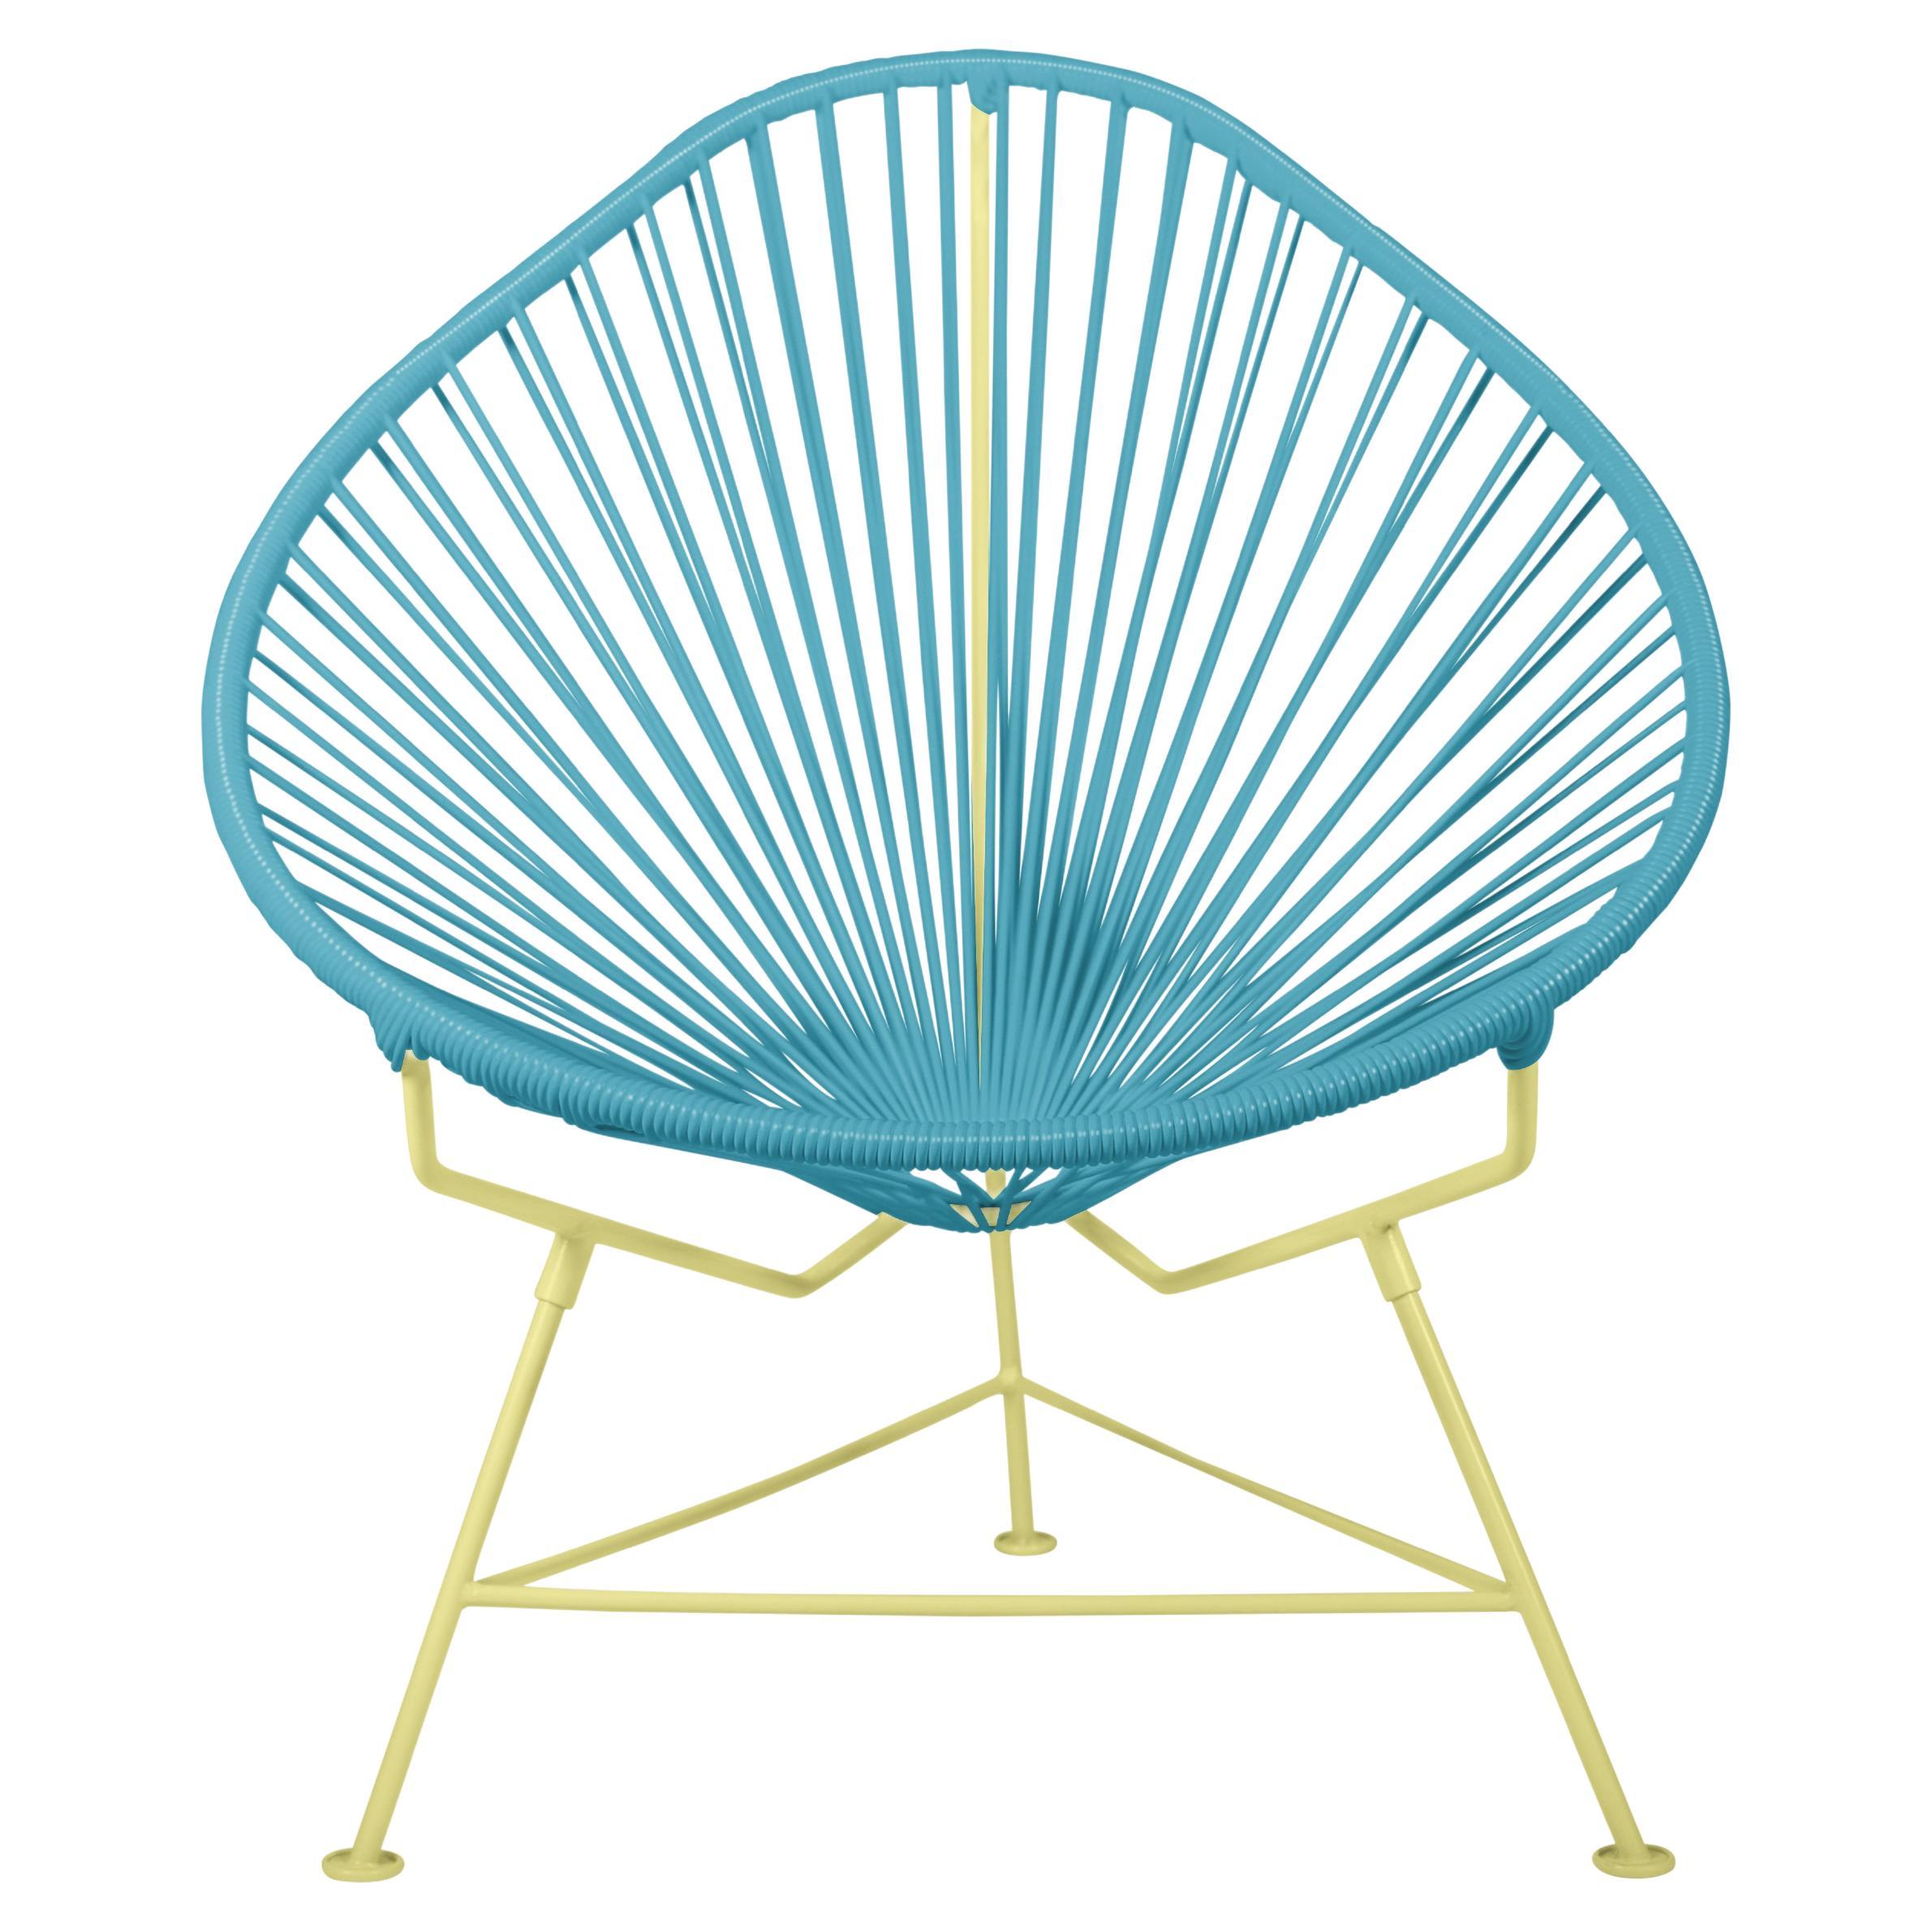 Innit Designs Acapulco Chair Blue Weave on Yellow Frame